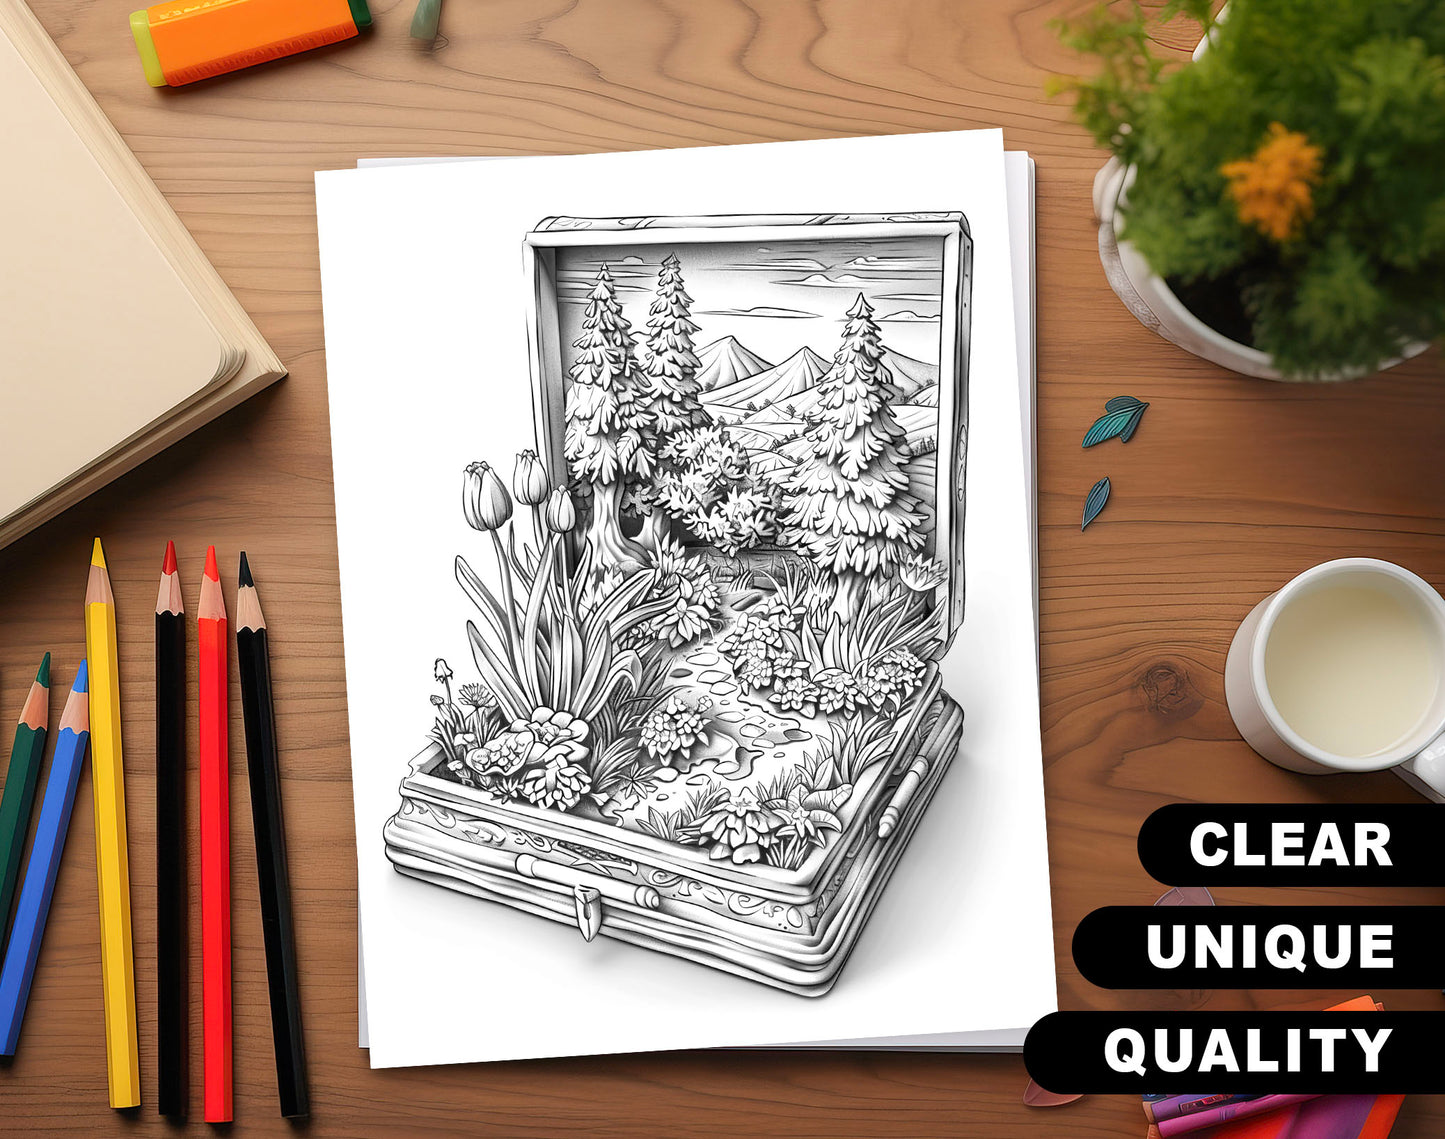 50 World In The Box Grayscale Coloring Pages - Instant Download - Printable Dark/Light